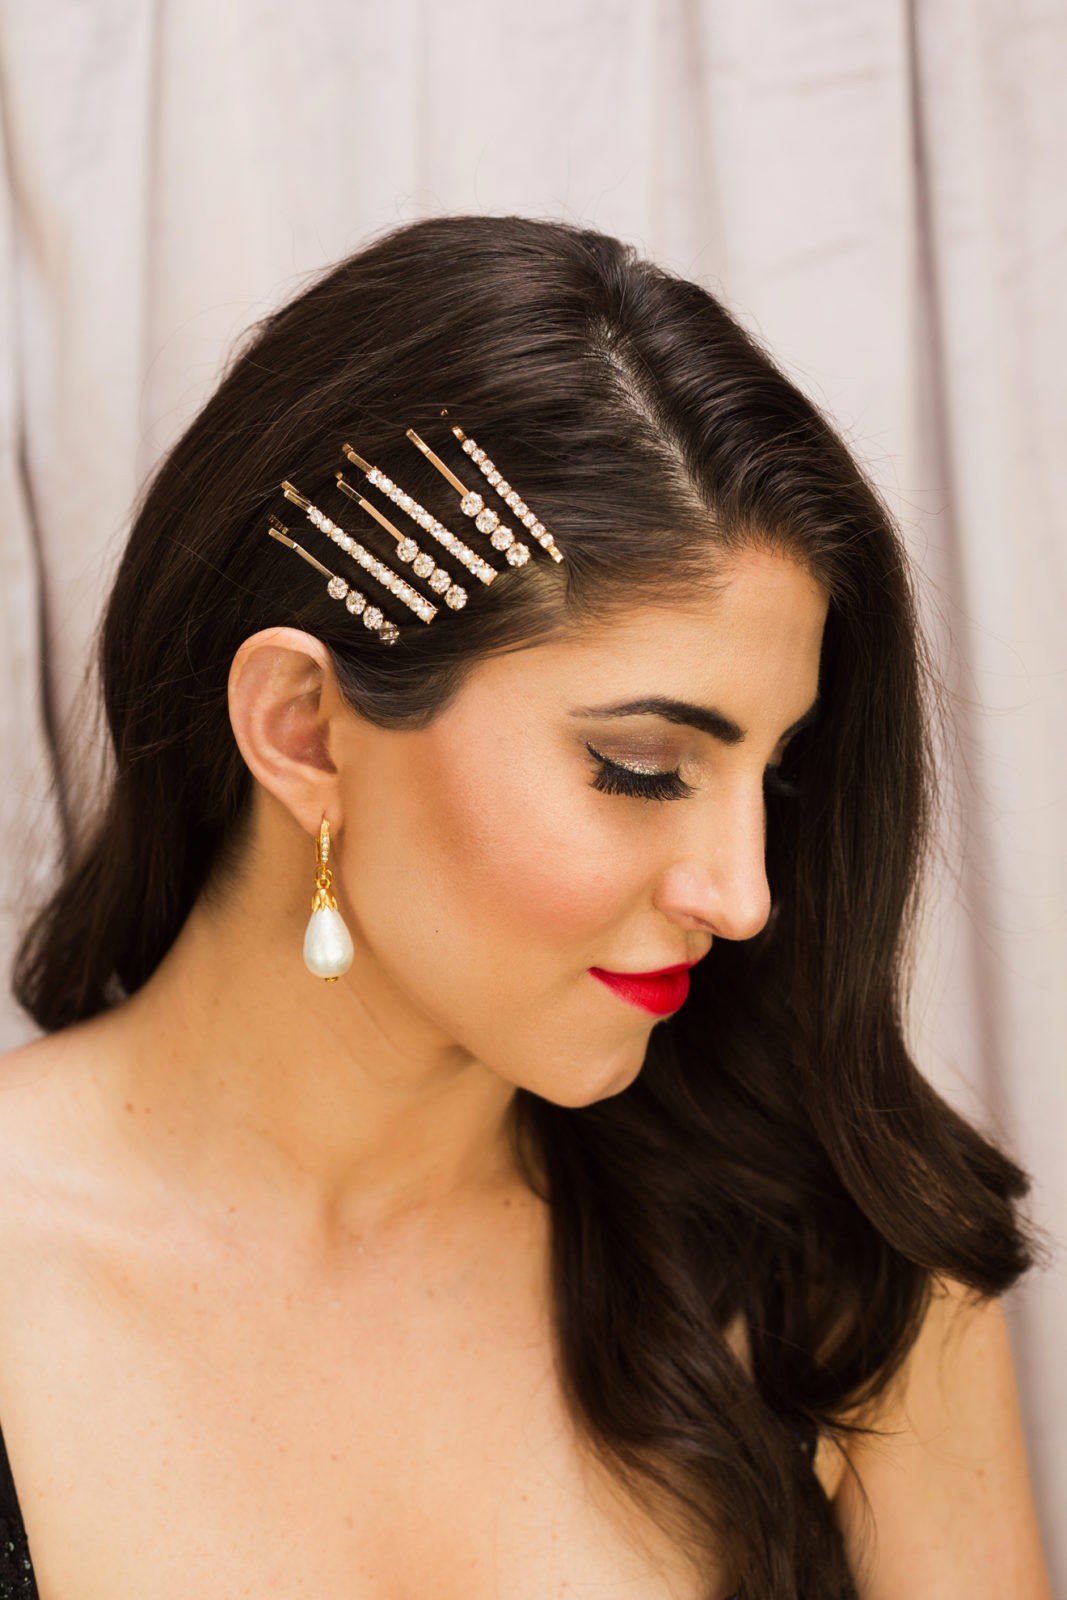 Classic Holiday Makeup Look by Beauty Blogger Laura Lily | Classic Holiday Makeup Tutorial by popular Los Angeles beauty blogger, Laura Lily: image of a woman wearing Nordstrom Oscar de la Renta OSCAR DE LA RENTA Imitation Pearl Drop Earrings, Main, color, PEARL Imitation Pearl Drop Earrings, Nordstrom Bronx and Banco Mademoiselle Noir Sequin Cocktail Dress, Nordstrom Chanel ROUGE ALLURE INK MATTE LIQUID LIP COLOUR, Nordstrom BP. Set of 6 Imitation Pearl & Crystal Hair Clips, Amazon Eylure Nikki Phillippi Feather light Feel Eyelashes, and holding a Target Estee & Lilly Crystal Mesh Pouch Frame Clutch.